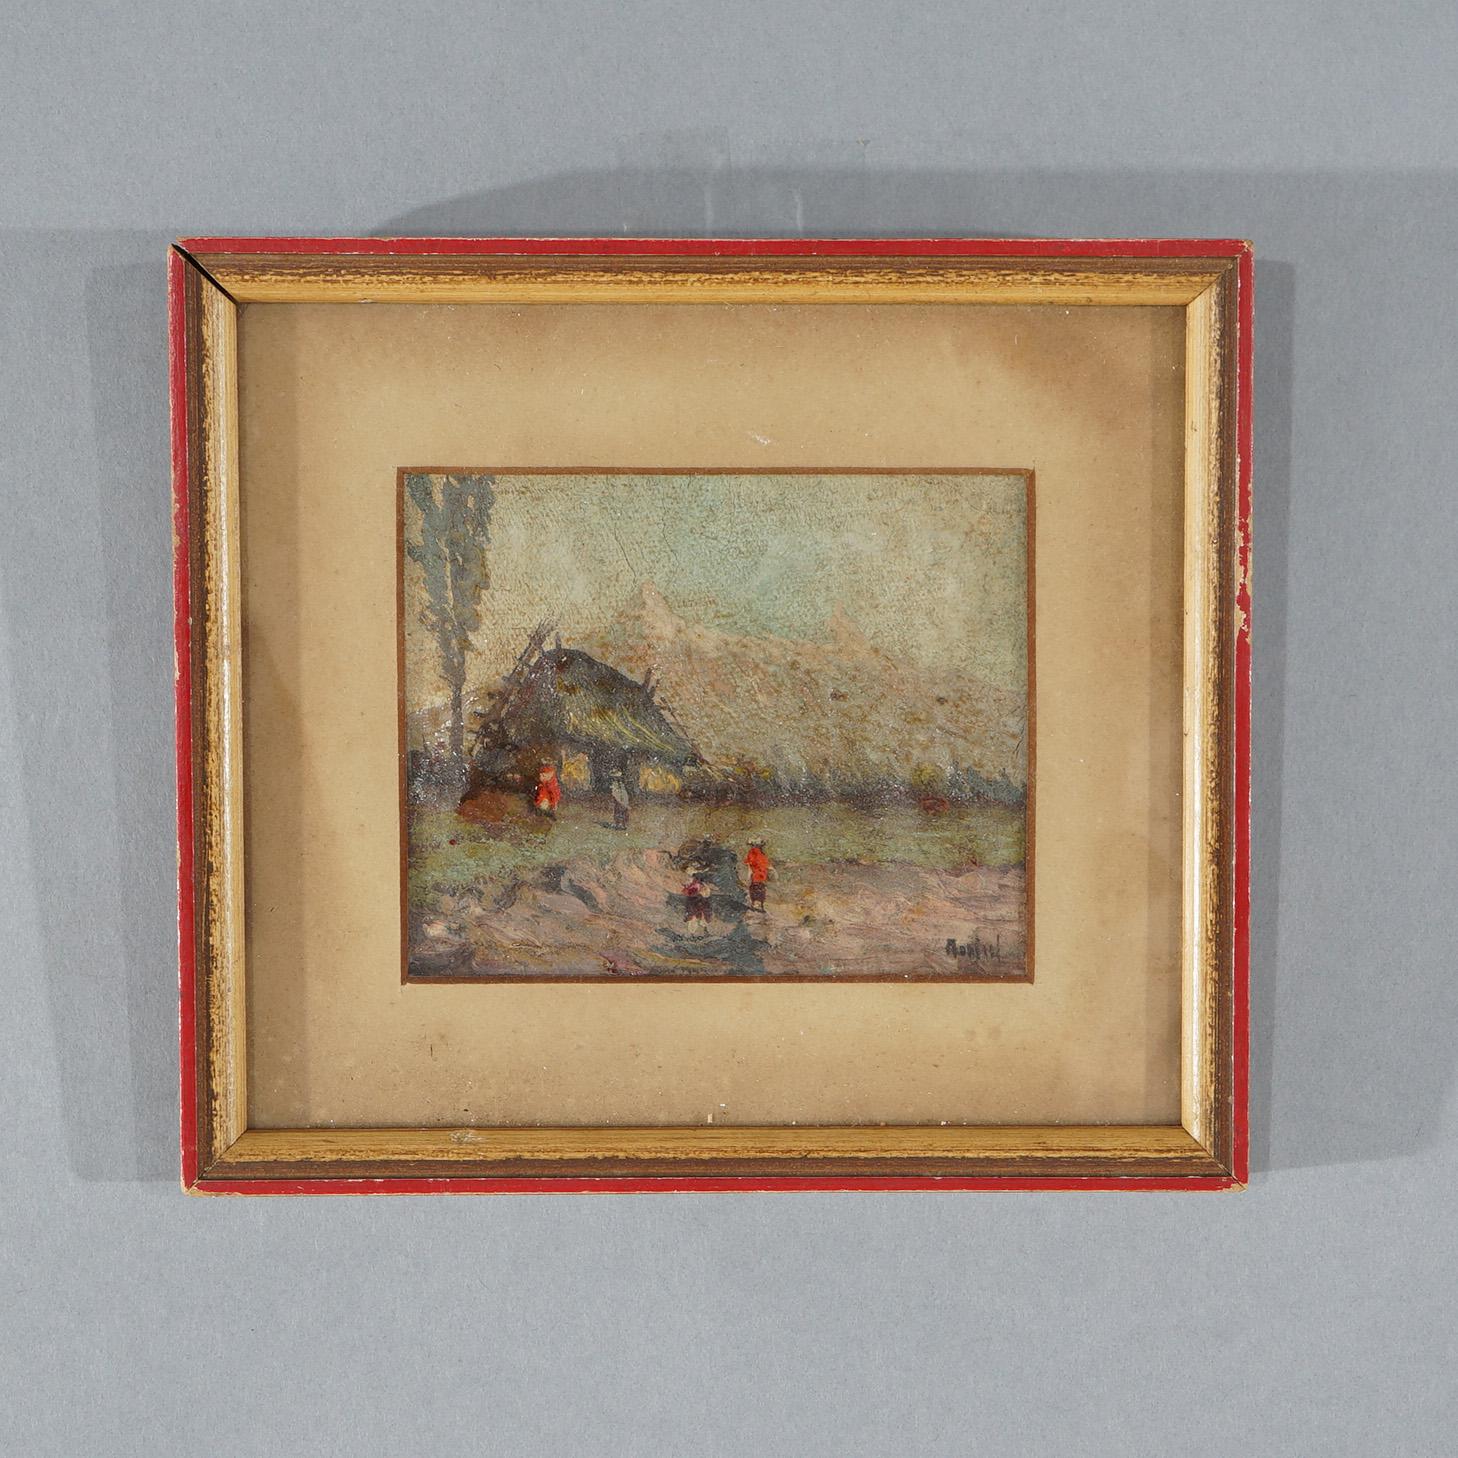 Two Antique Landscape Oil on Board & One Watercolor Painting, Framed, C1920

Measures - 12.75